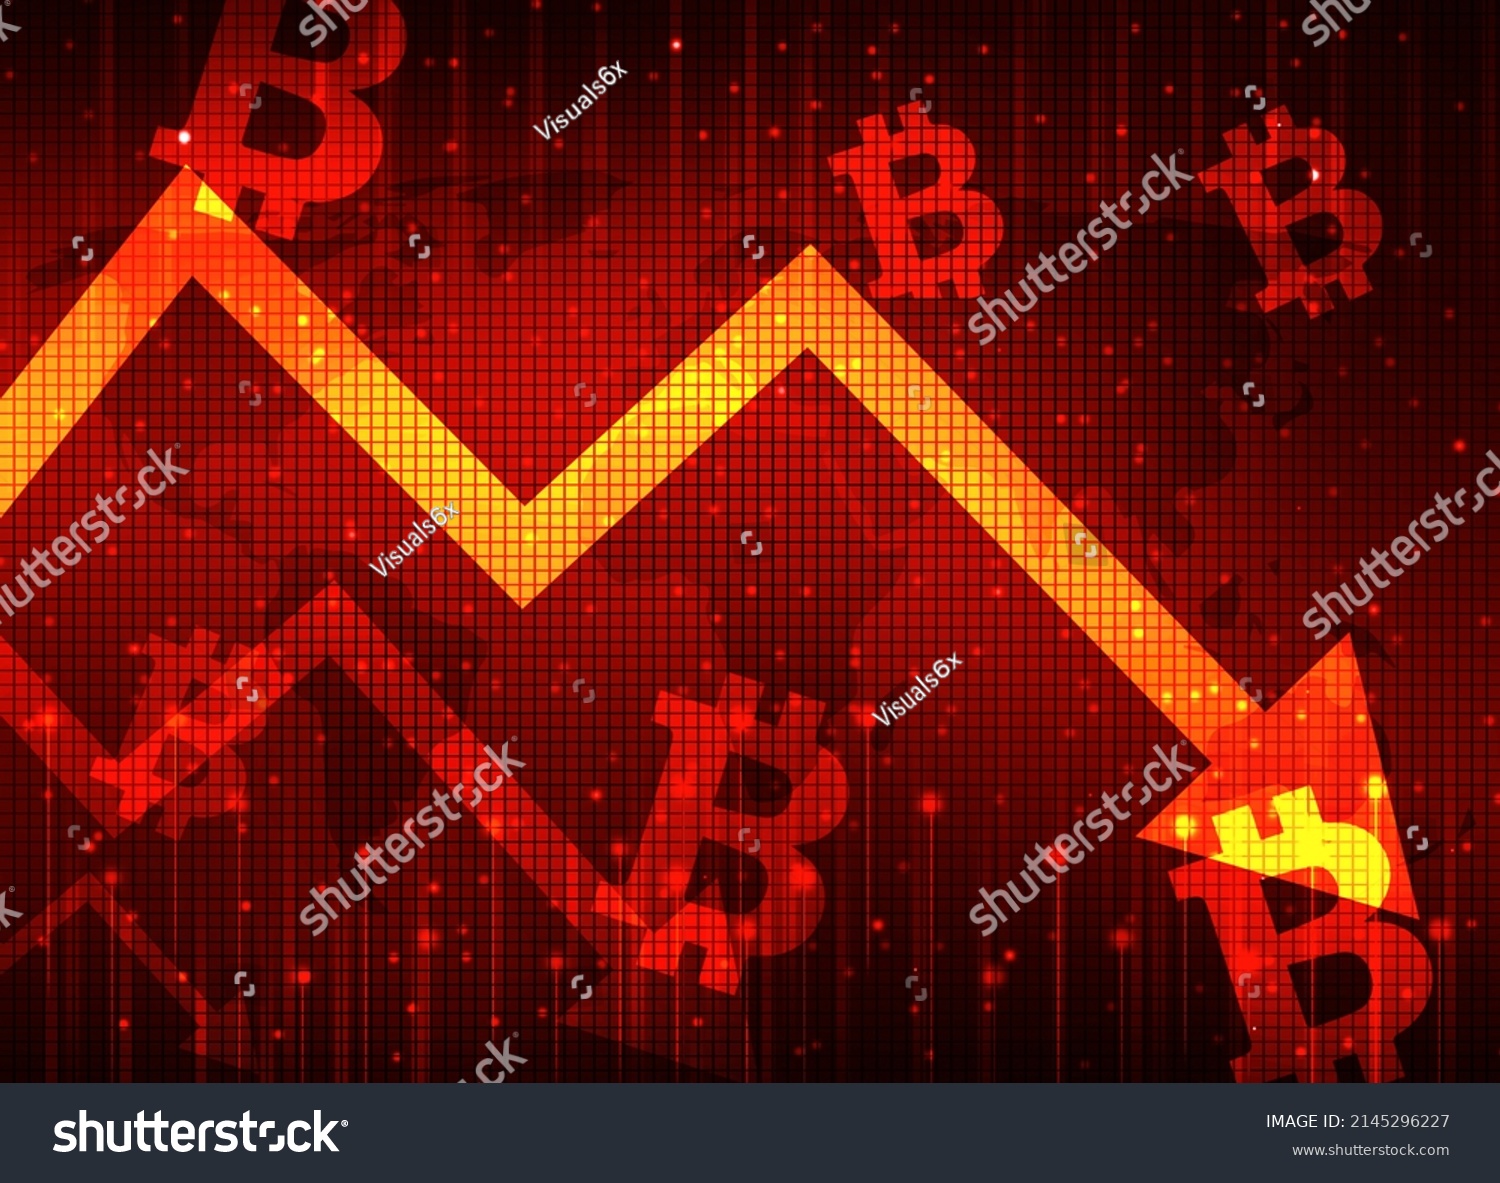 Crypto Currency Crash Concept Abstract Background Stock Illustration